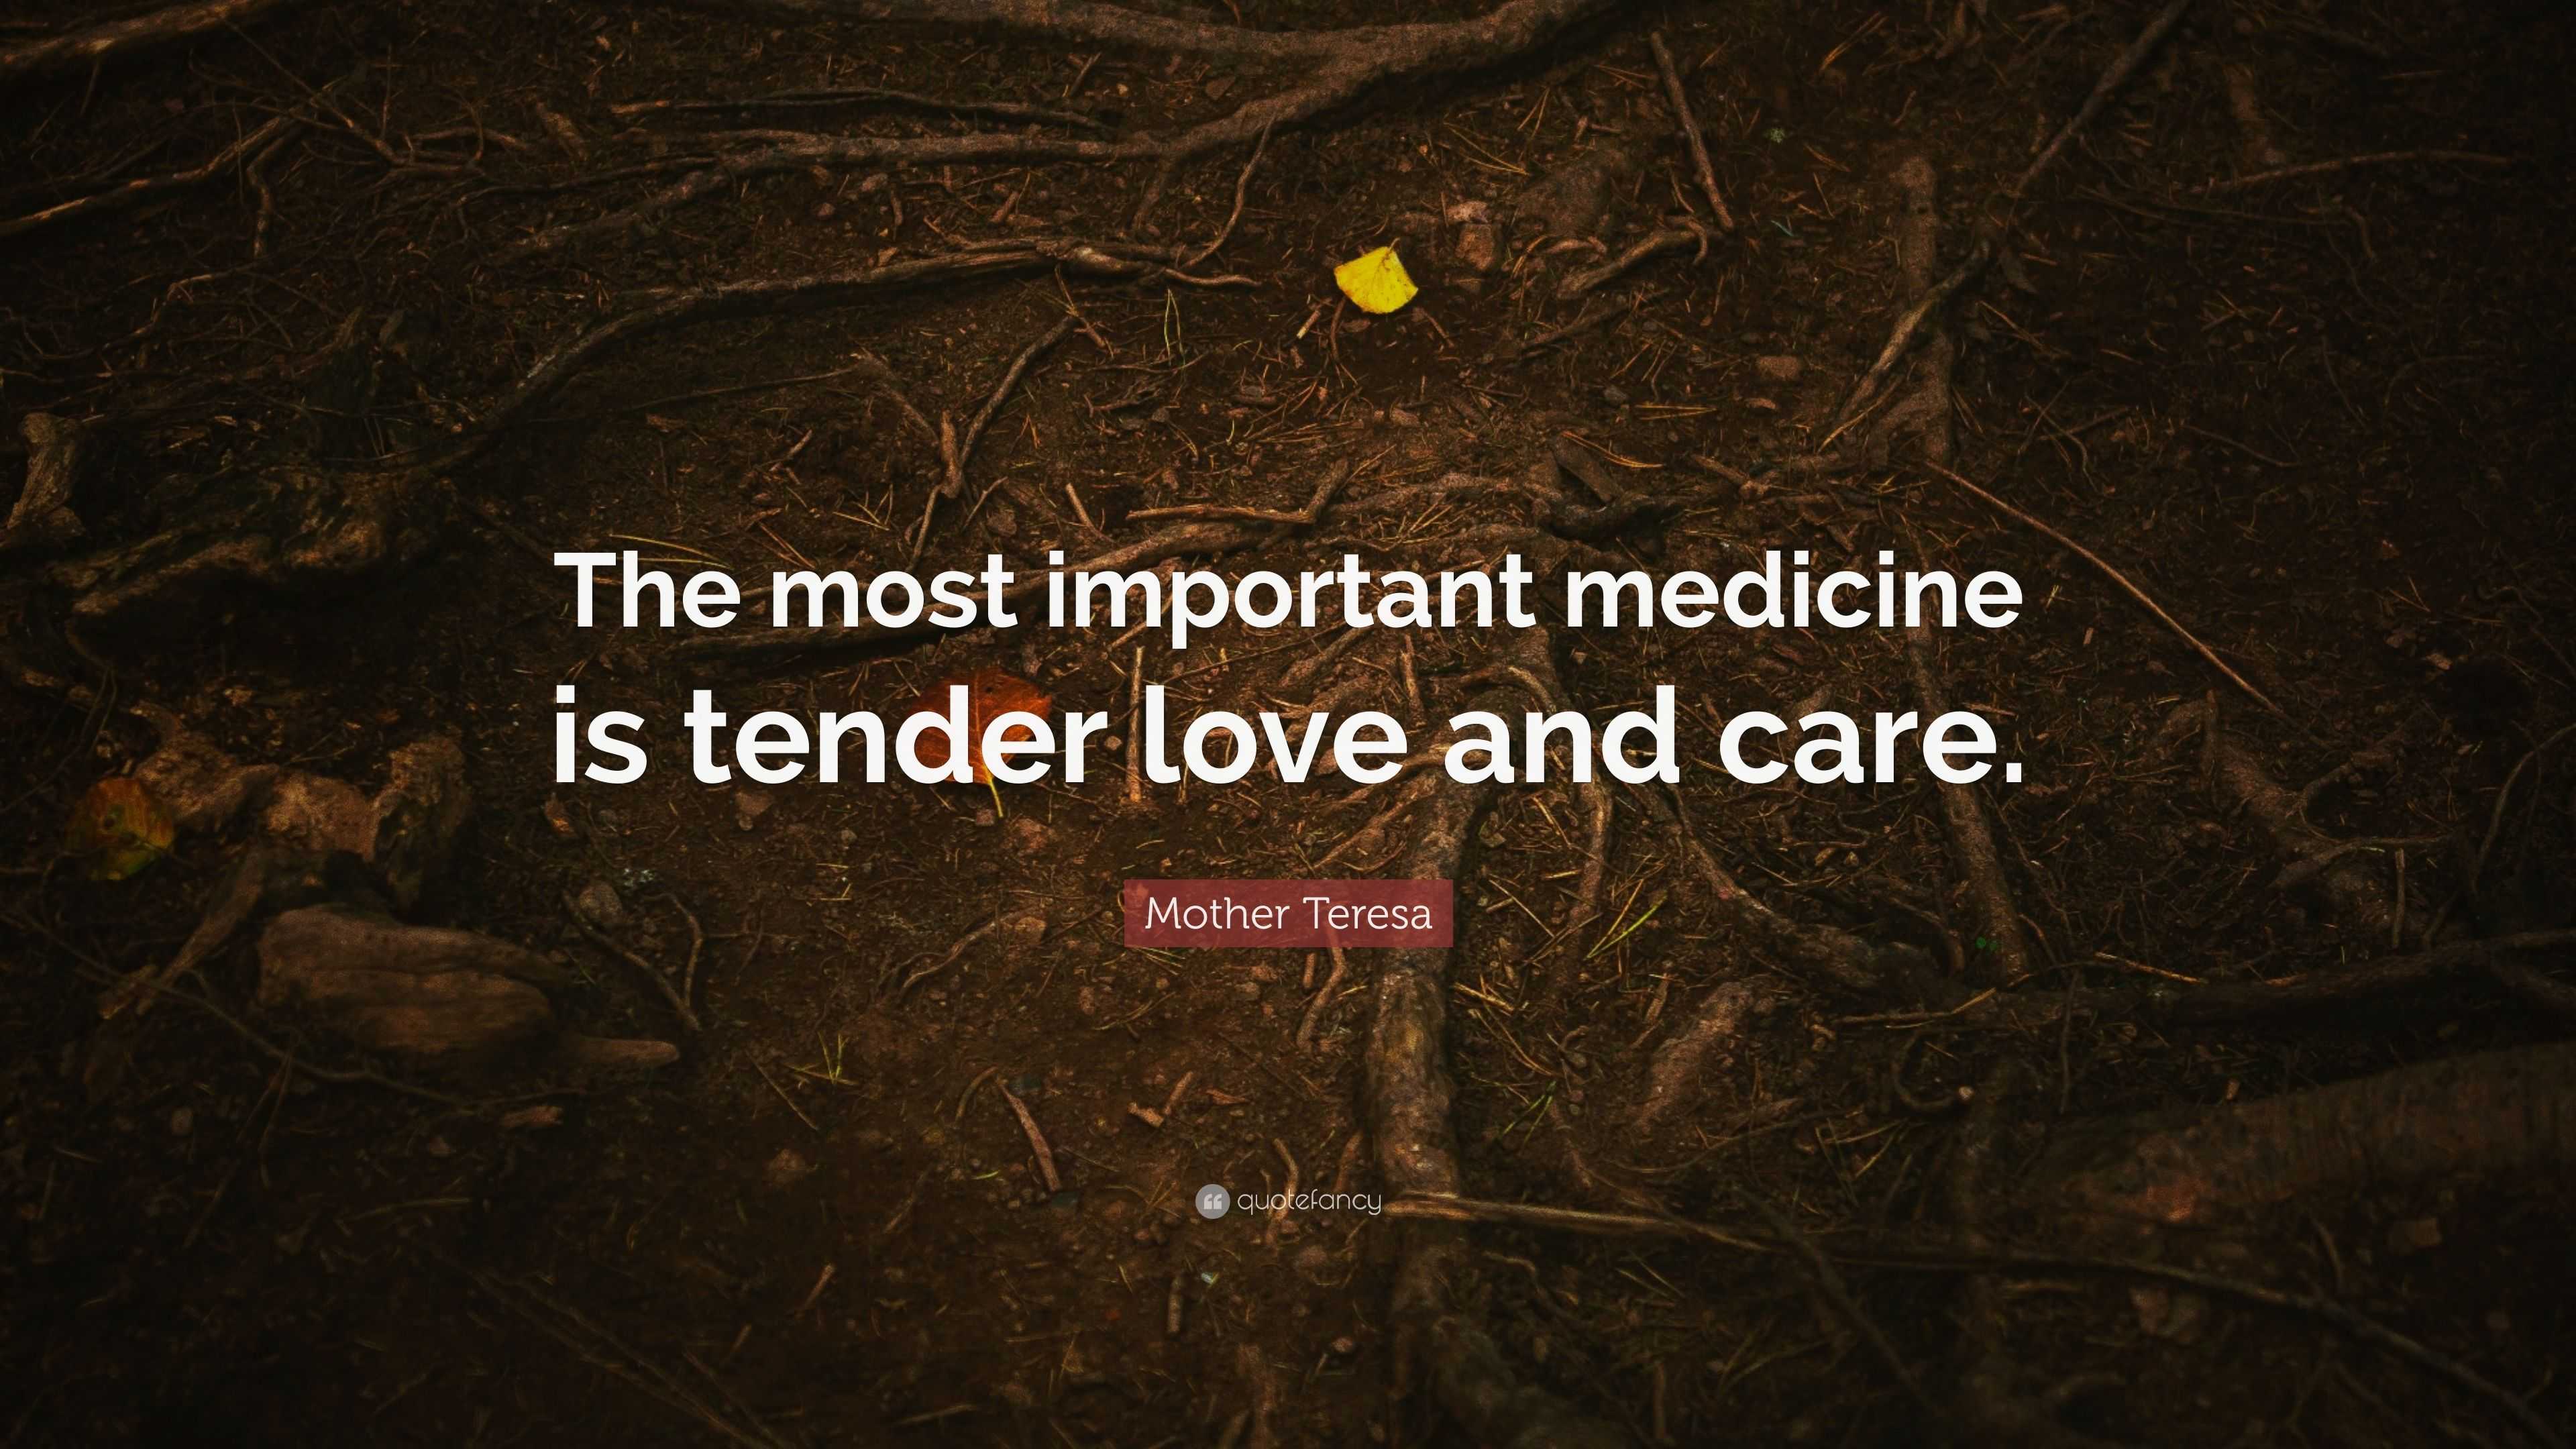 love and care medicine quotes